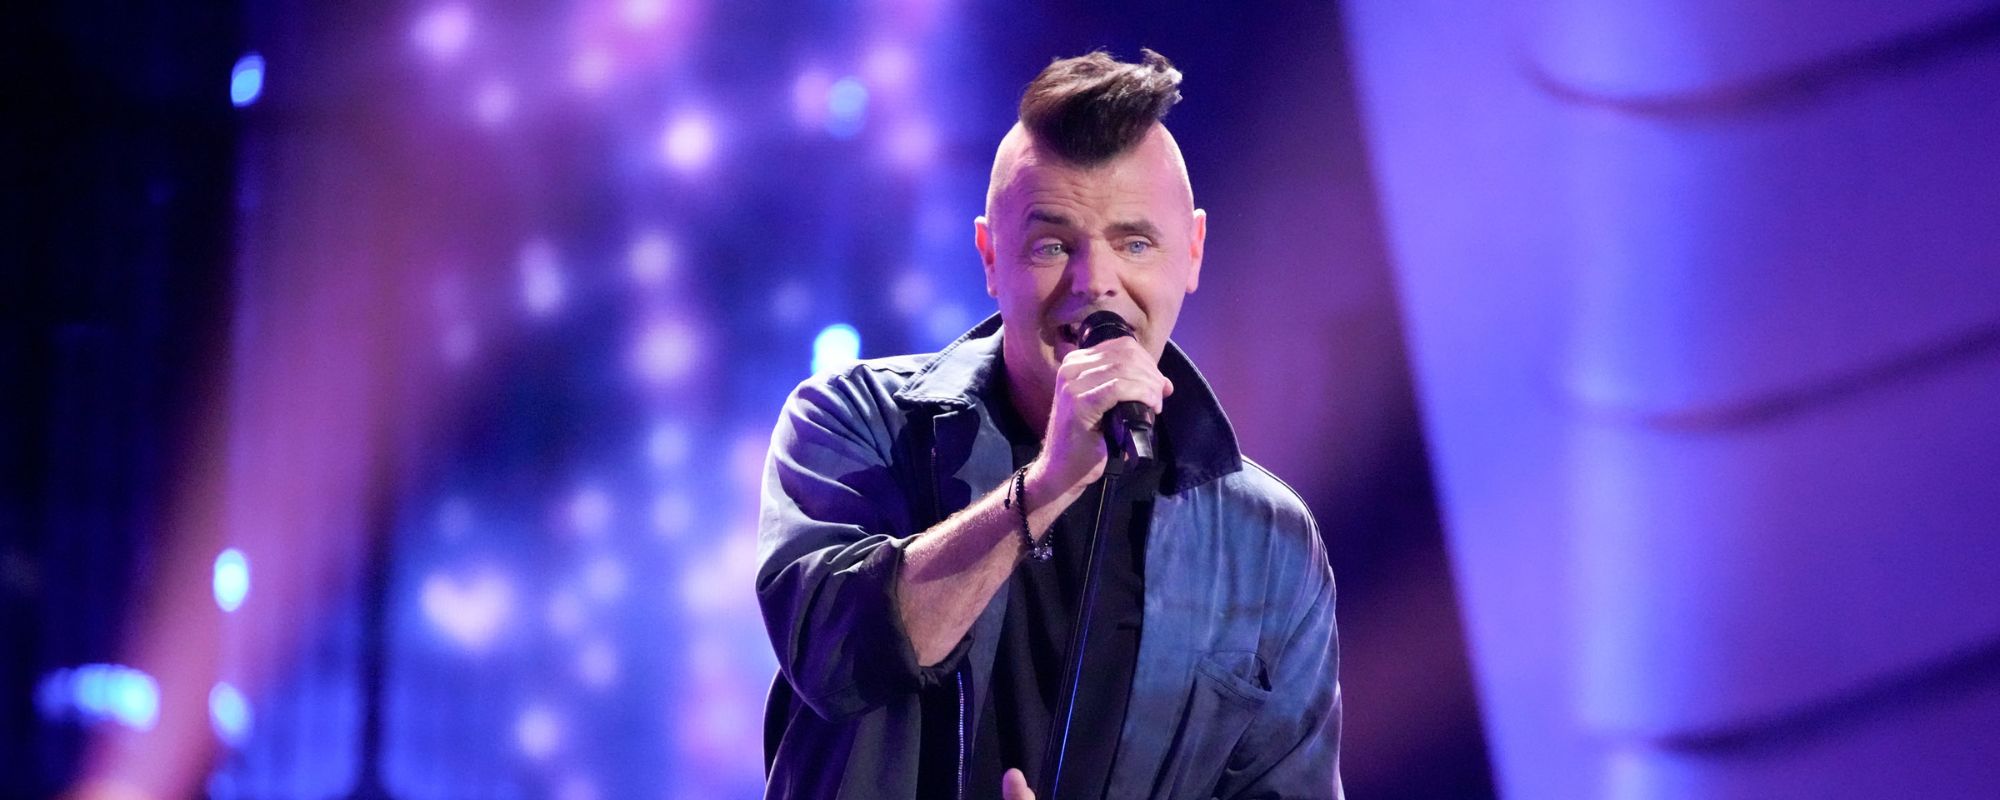 ‘The Voice’ Star Bryan Olesen Brings John Legend to Tears With Moving Cover of Benson Boone’s “Beautiful Things”